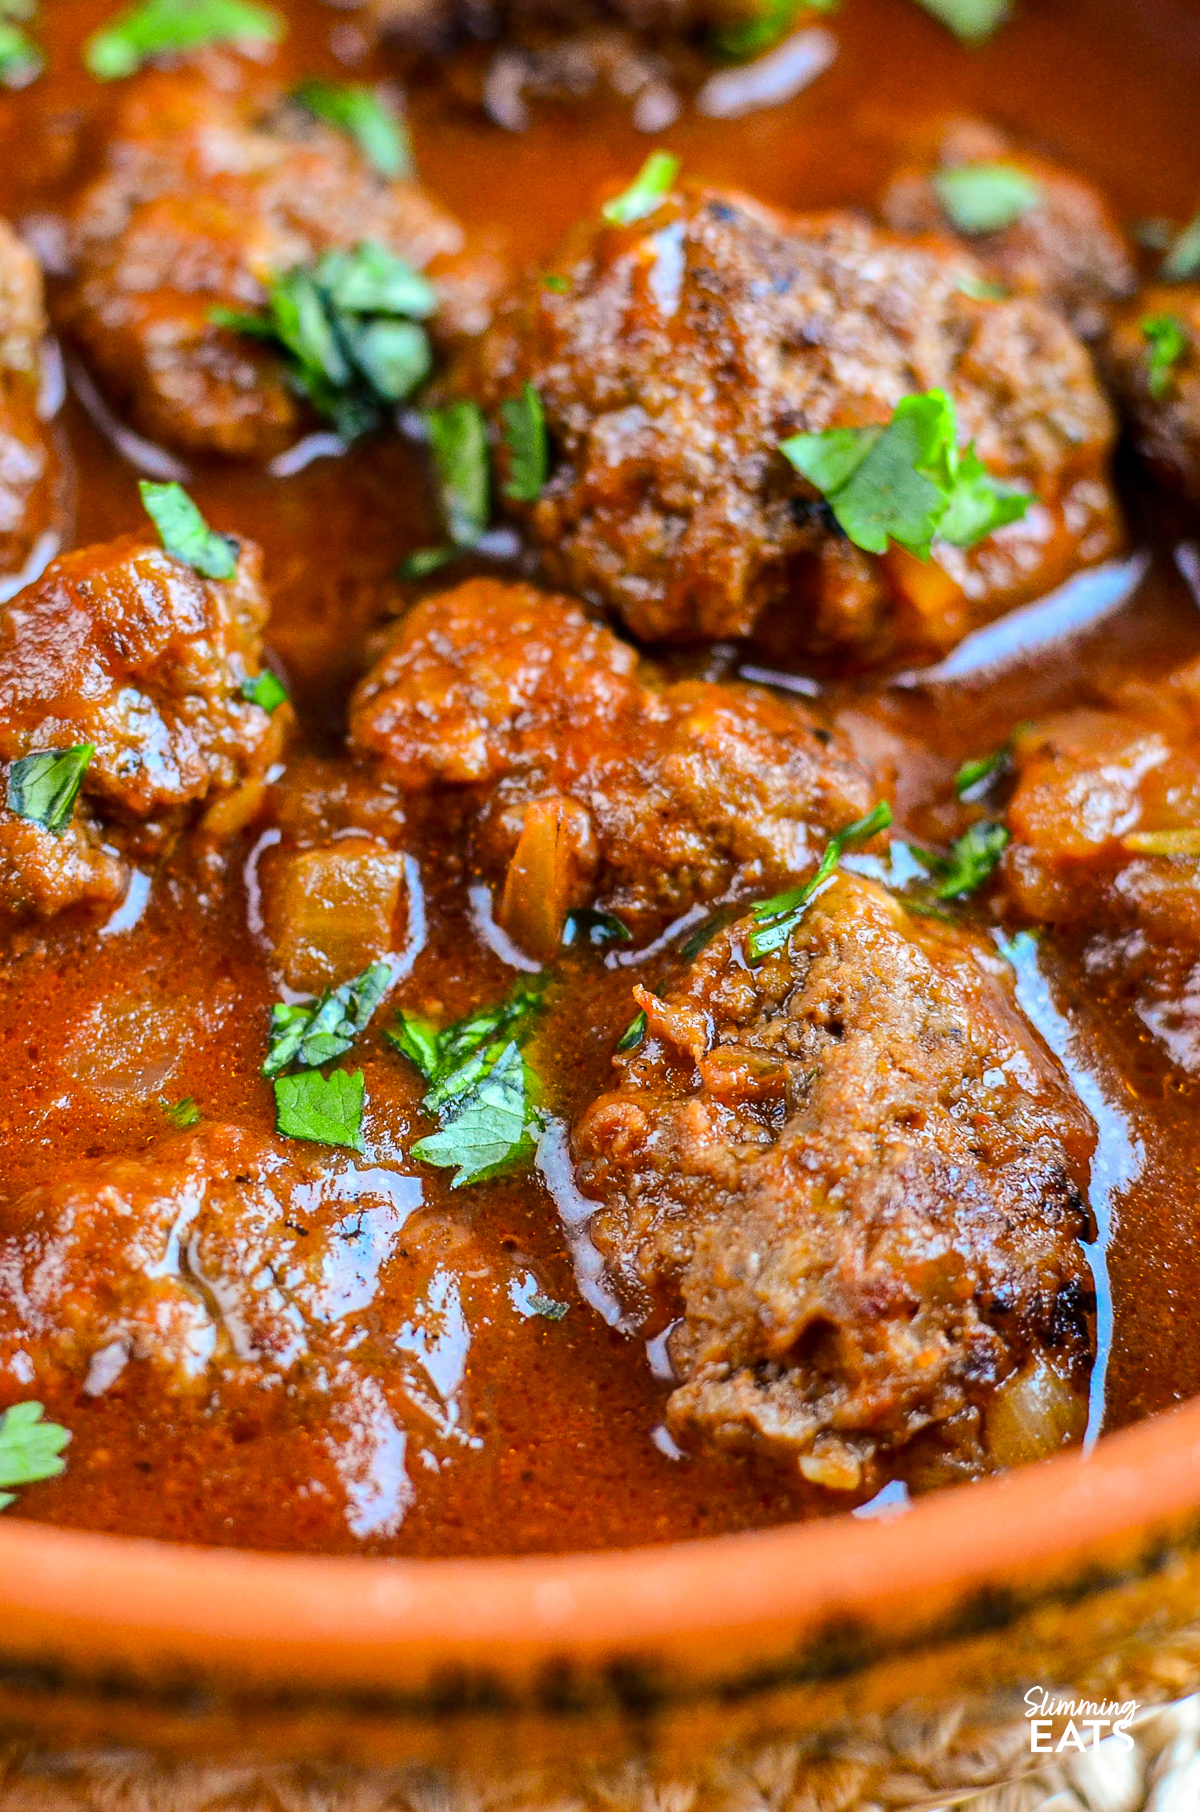 Beef meatballs bathed in a rich tomato-maple sauce, presented in an orange ceramic dish with a handle, showcasing a vibrant and appetizing meal.